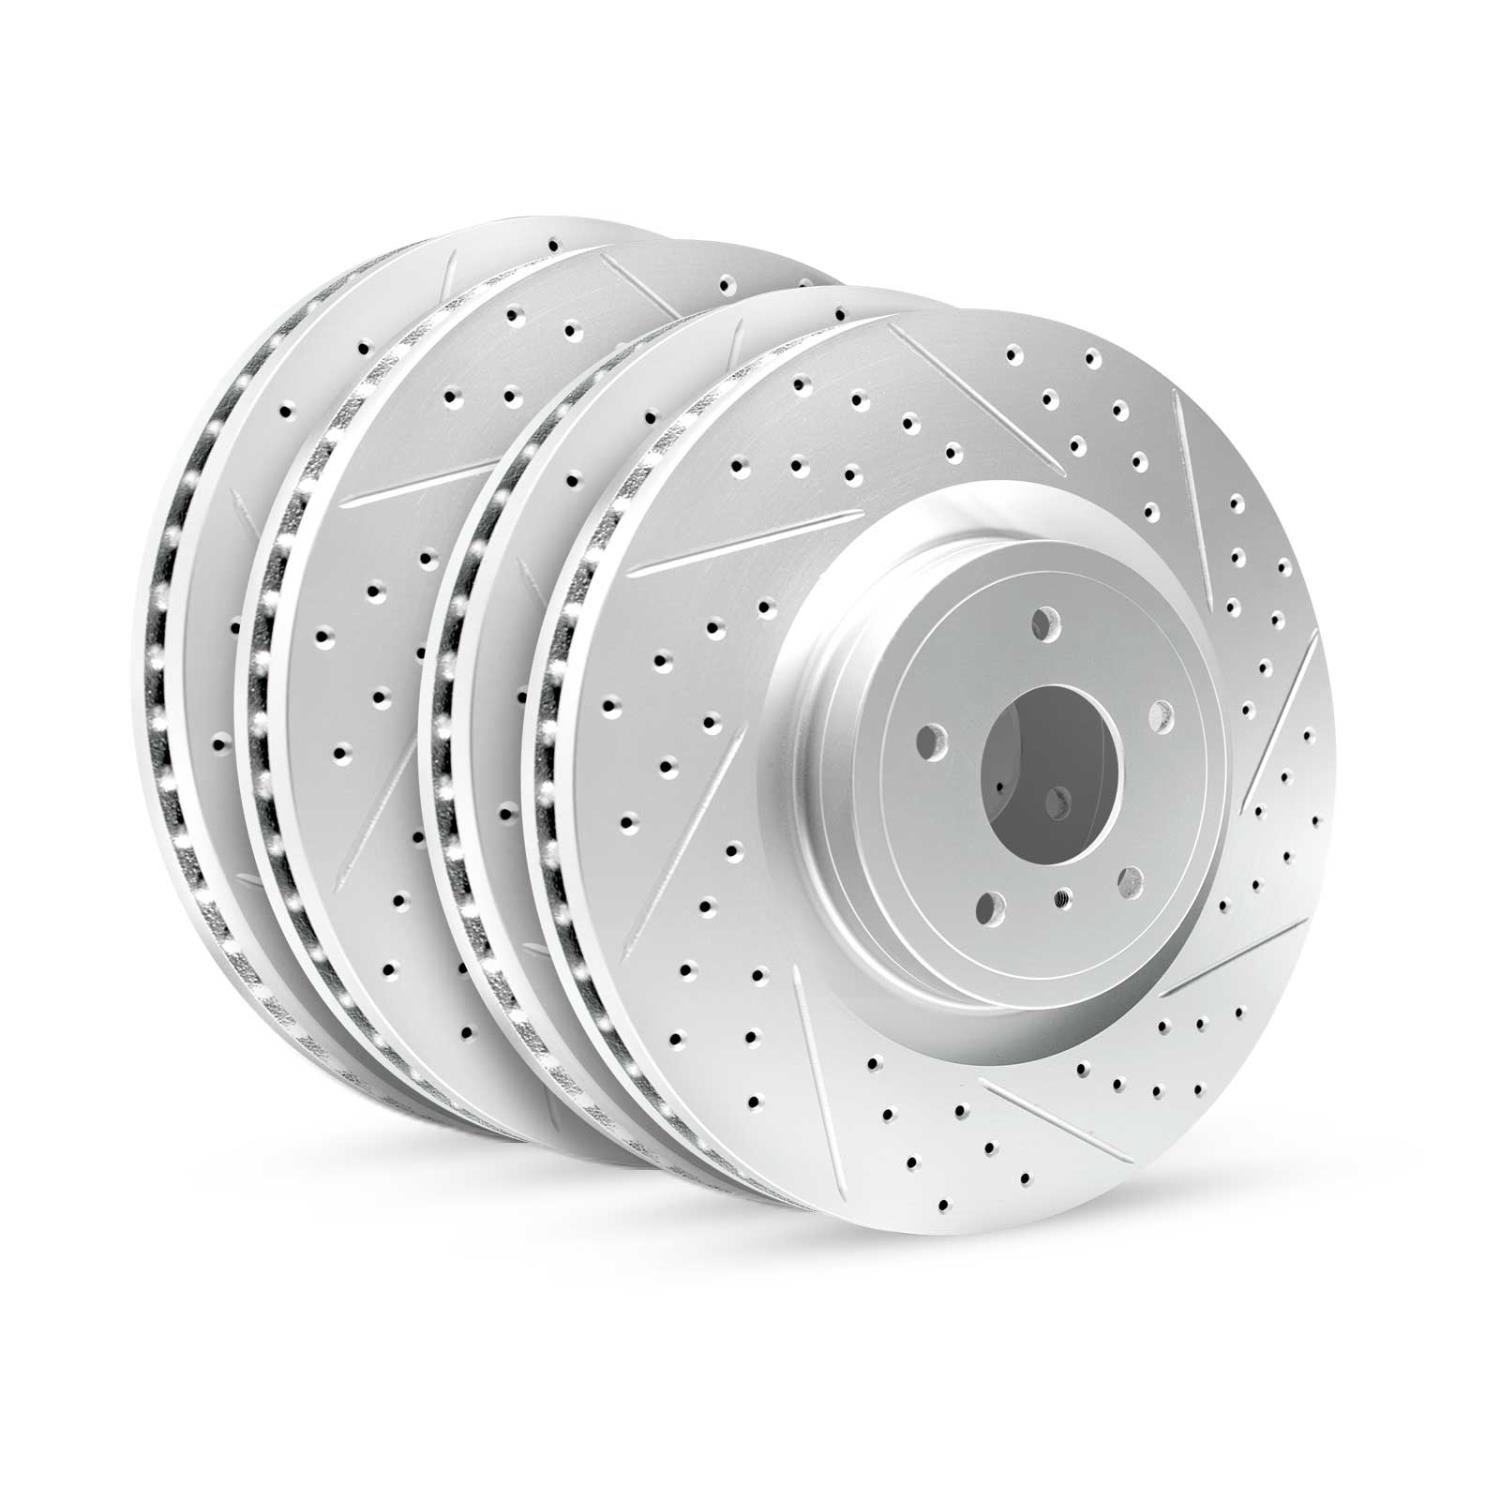 GEO-Carbon Drilled/Slotted Rotors, 2000-2003 BMW, Position: Front/Rear